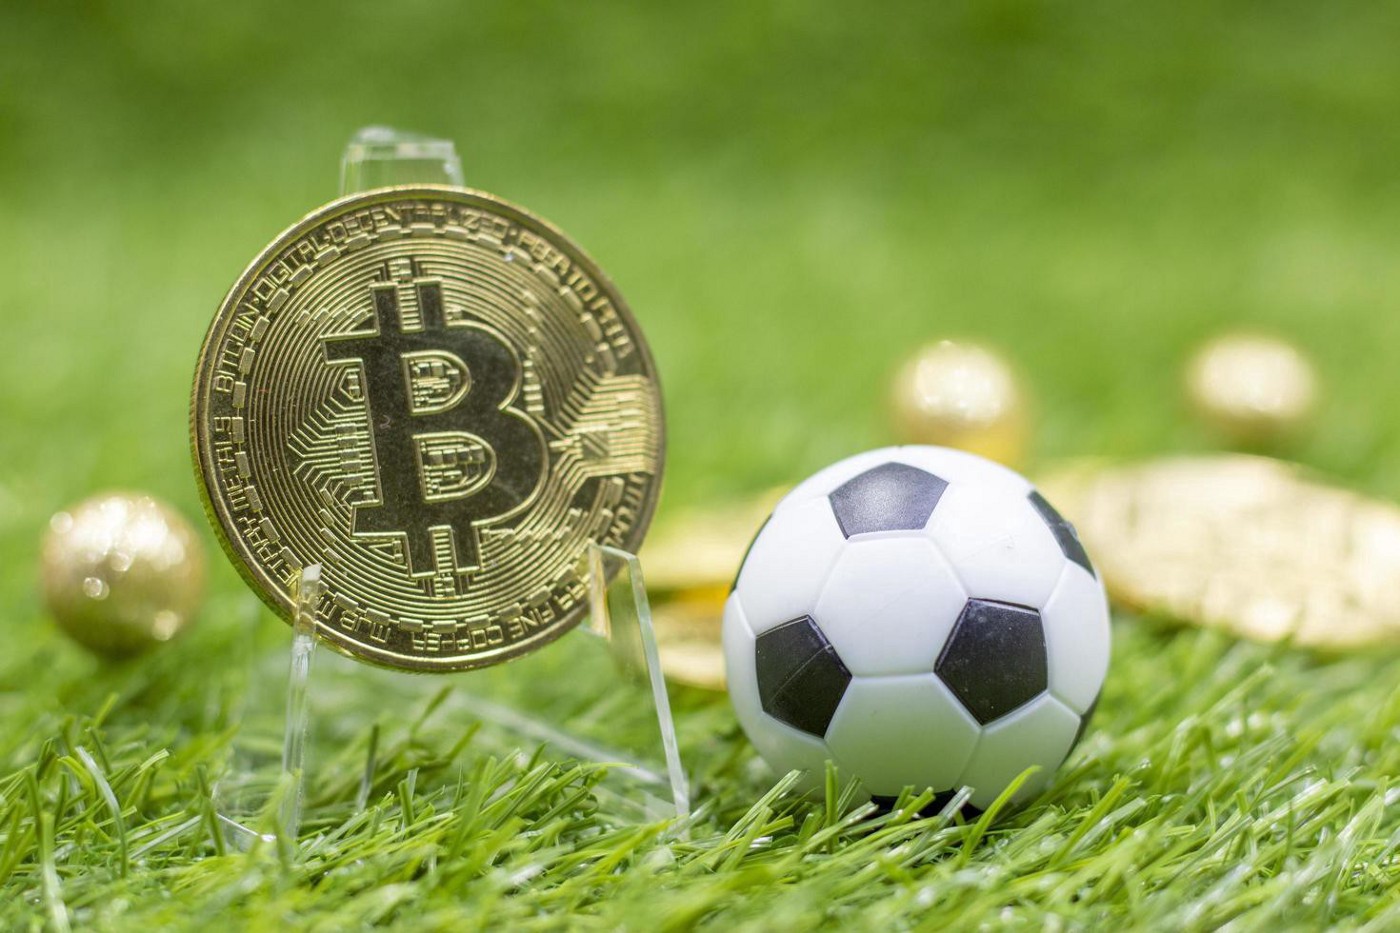 Blockchain and football, tokens appeal to teams and fans: all impacts